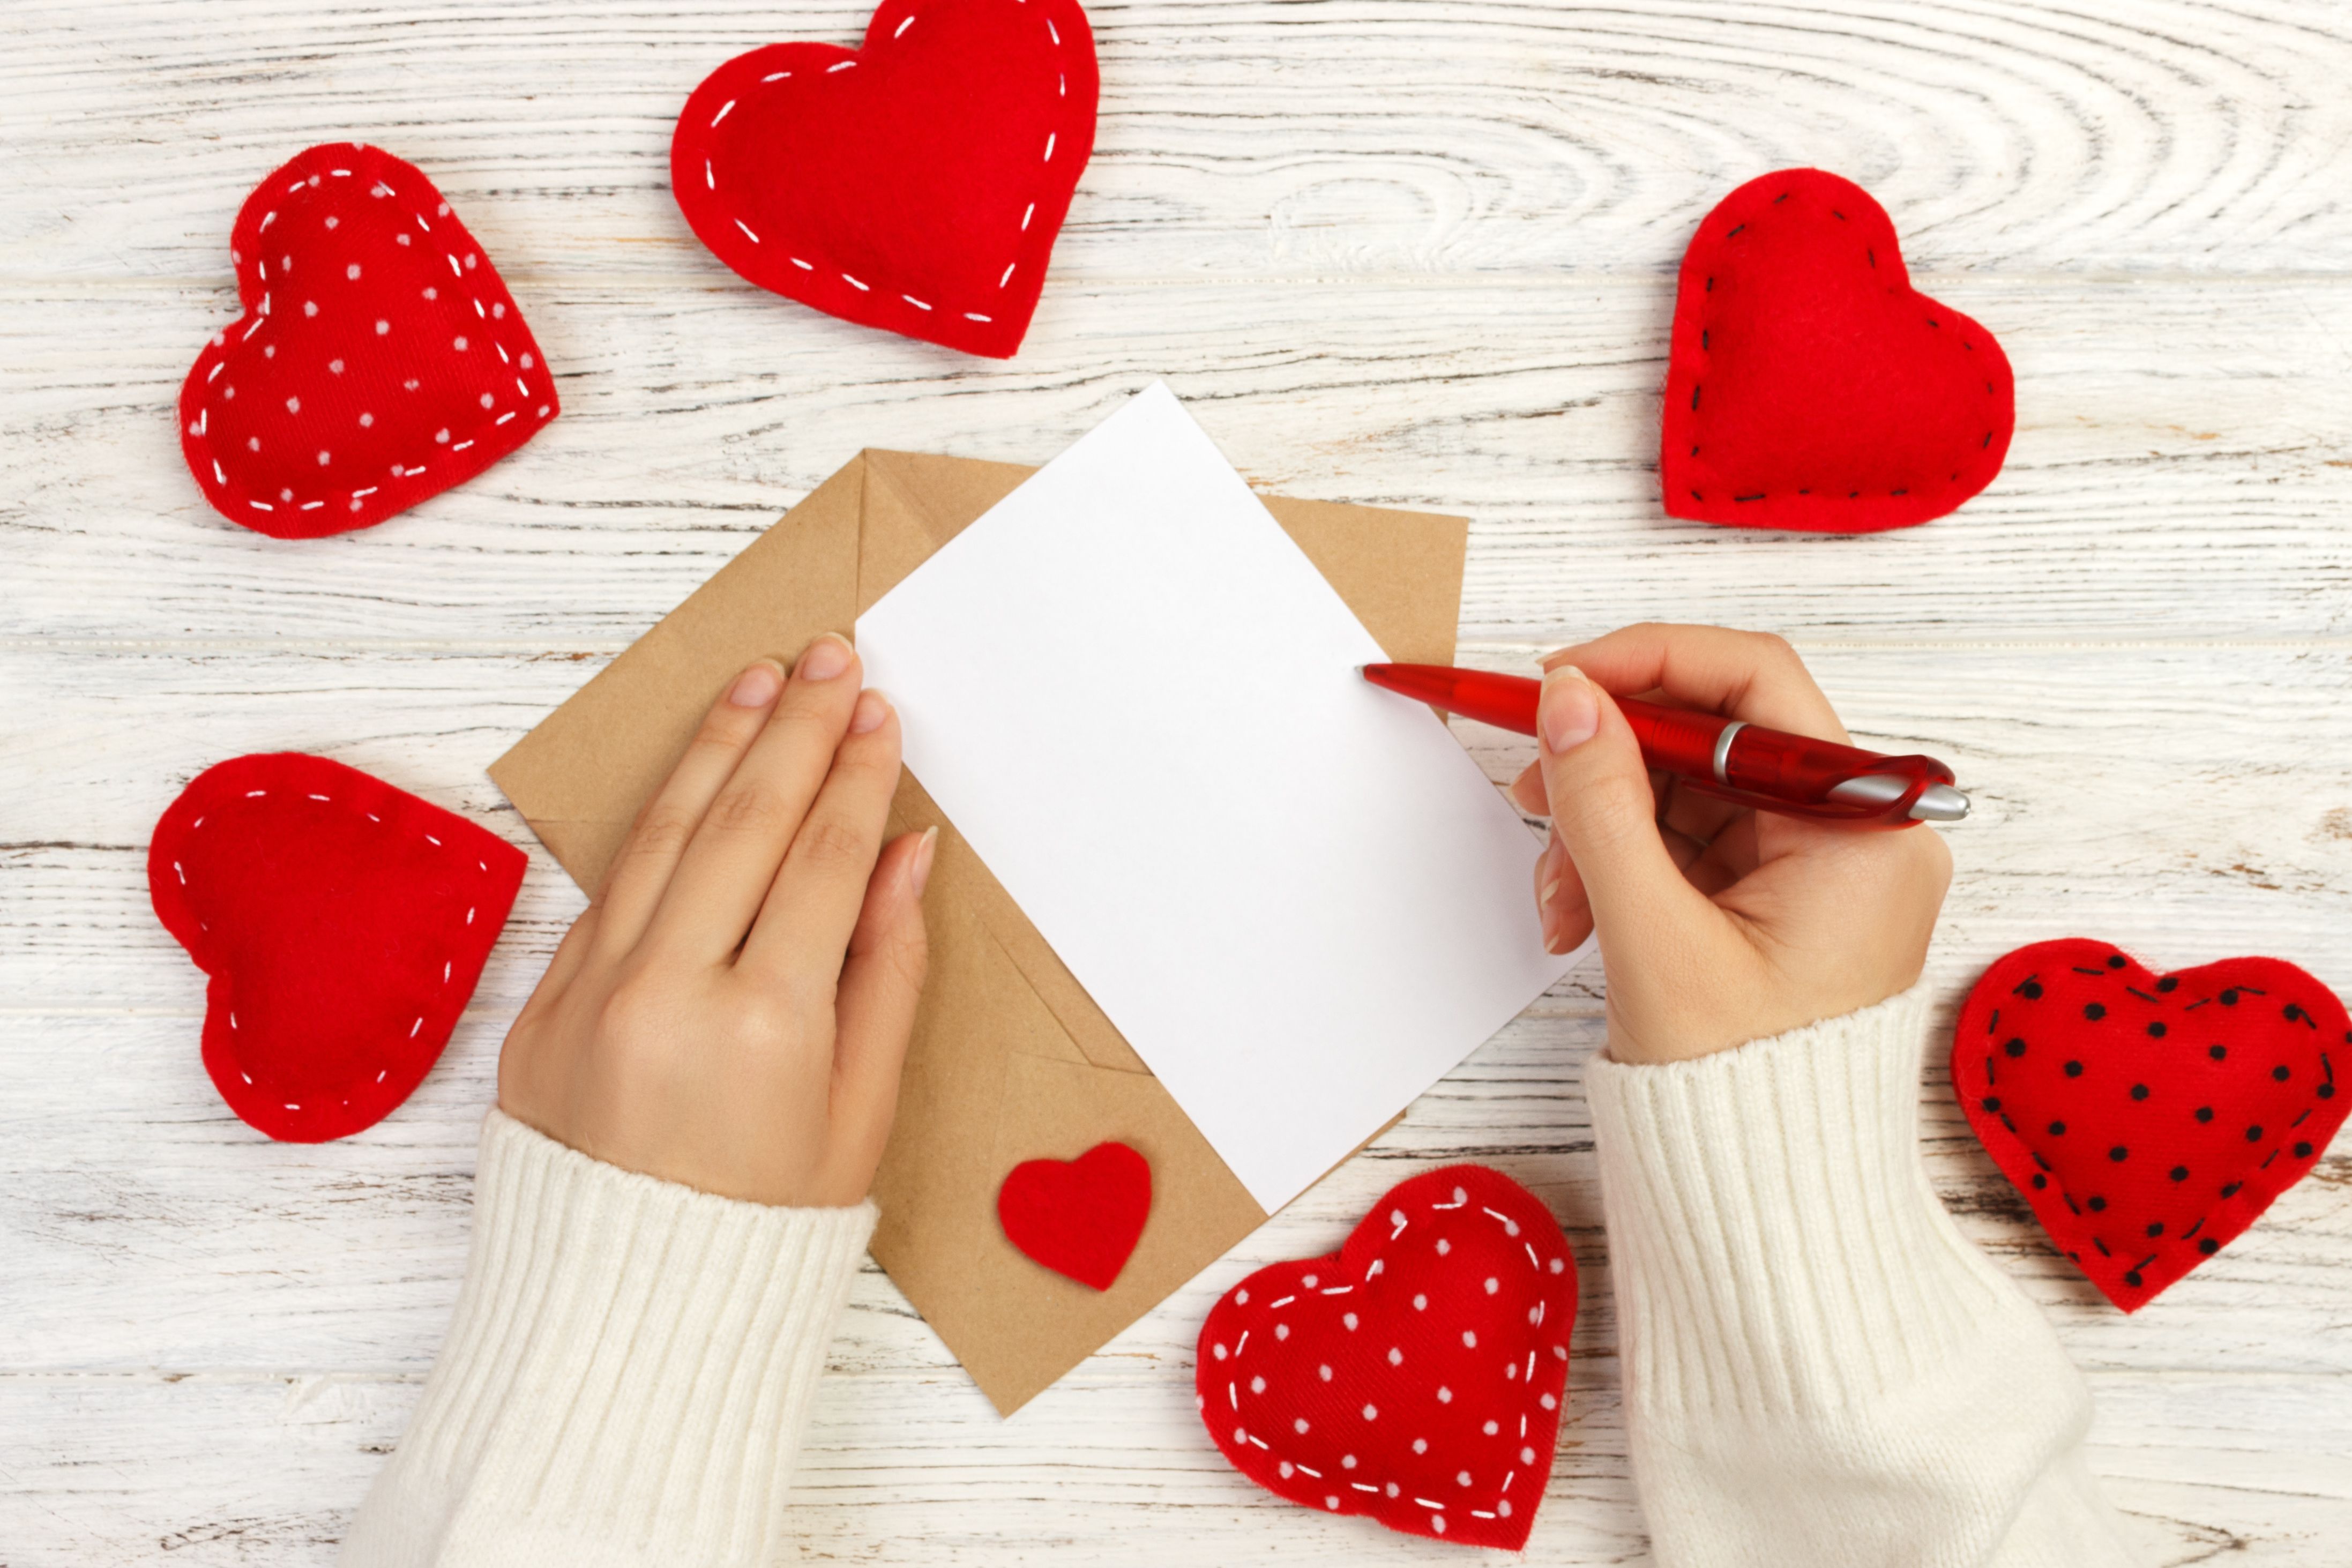 50 Best Valentine S Day Wishes Messages What To Write In A V Day Card Flirting over texts or in a social media post helps people feel good about themselves, rekindle the romance, and often time helps to set up a new. what to write in a v day card